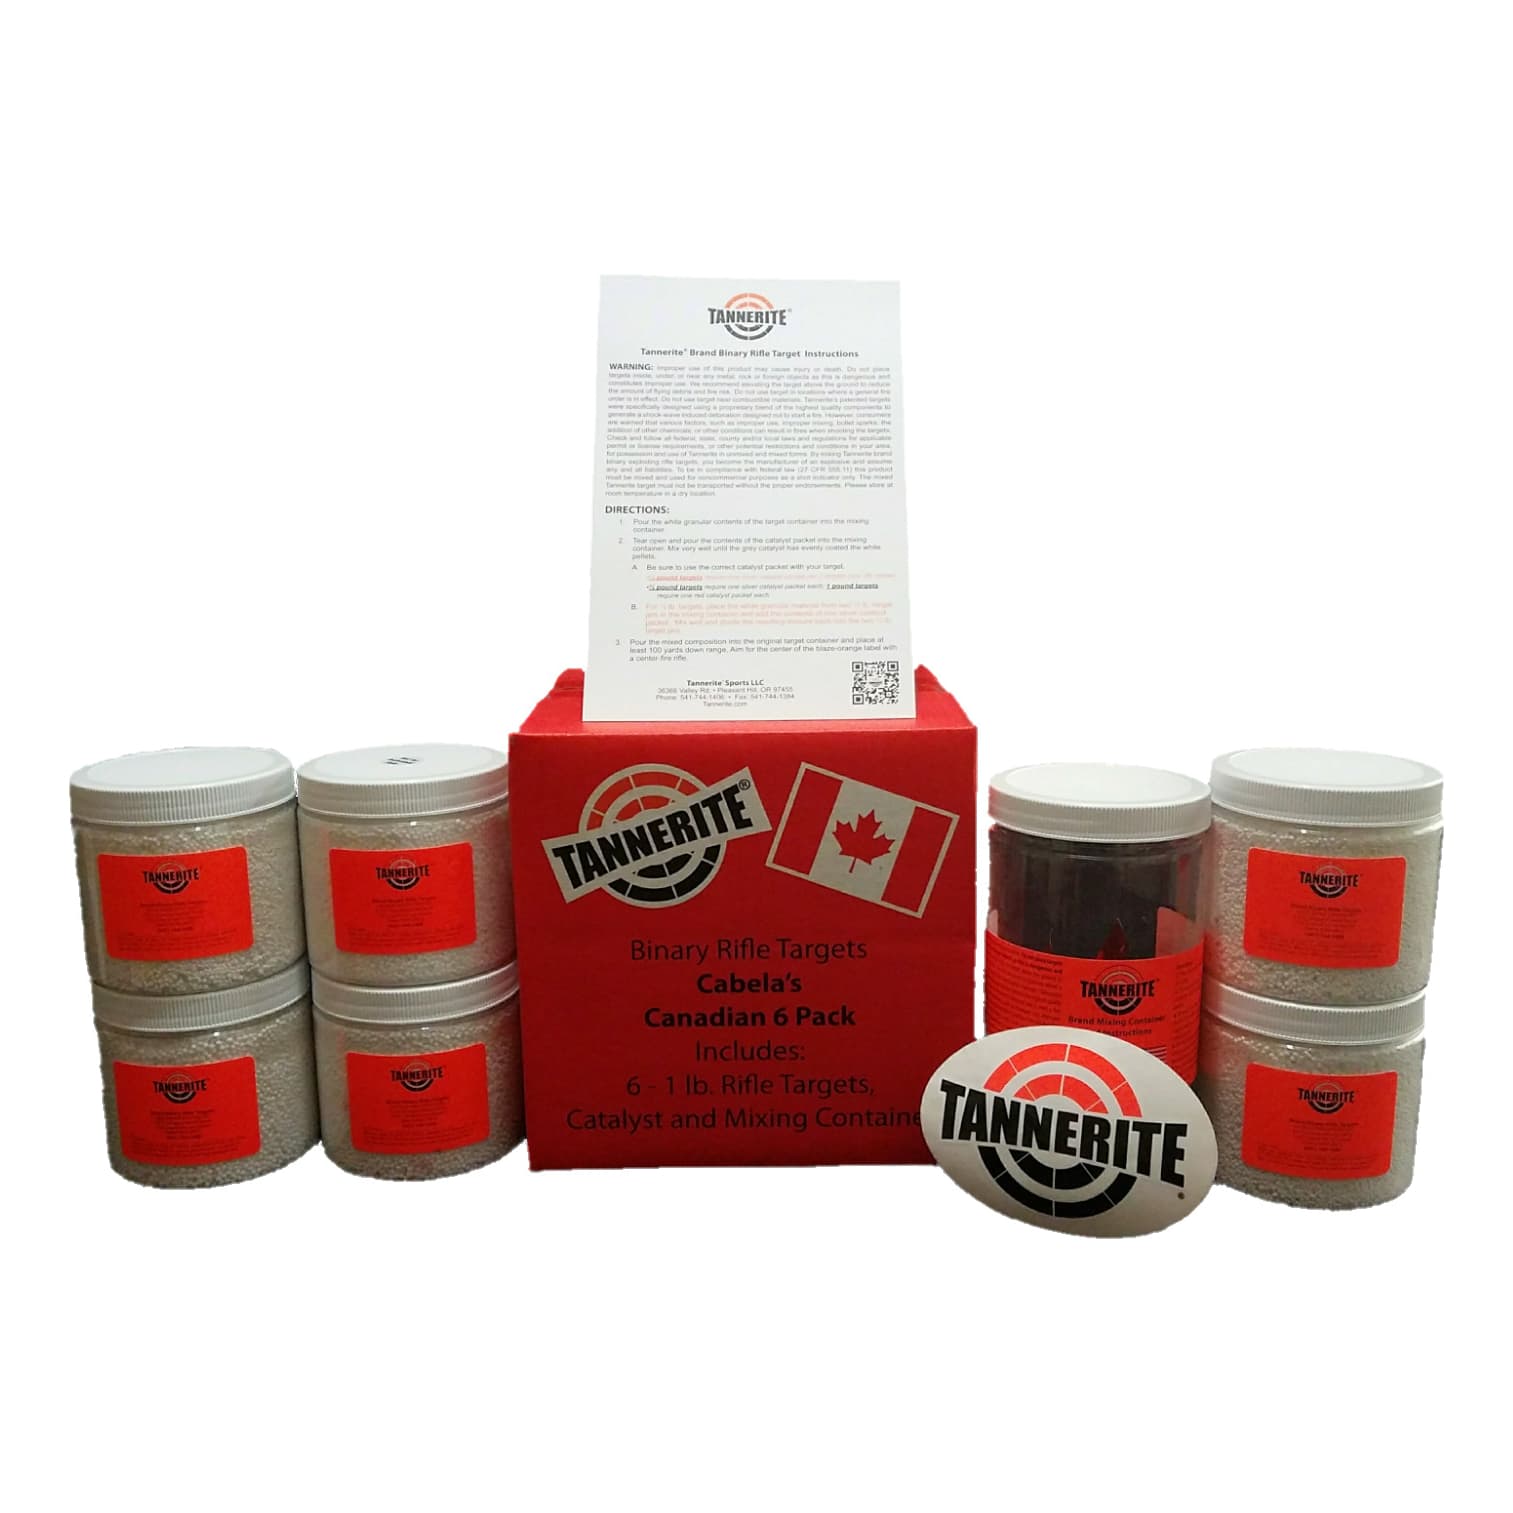 Tannerite® Exploding Rifle Targets - Cabela's Canadian 6 Pack